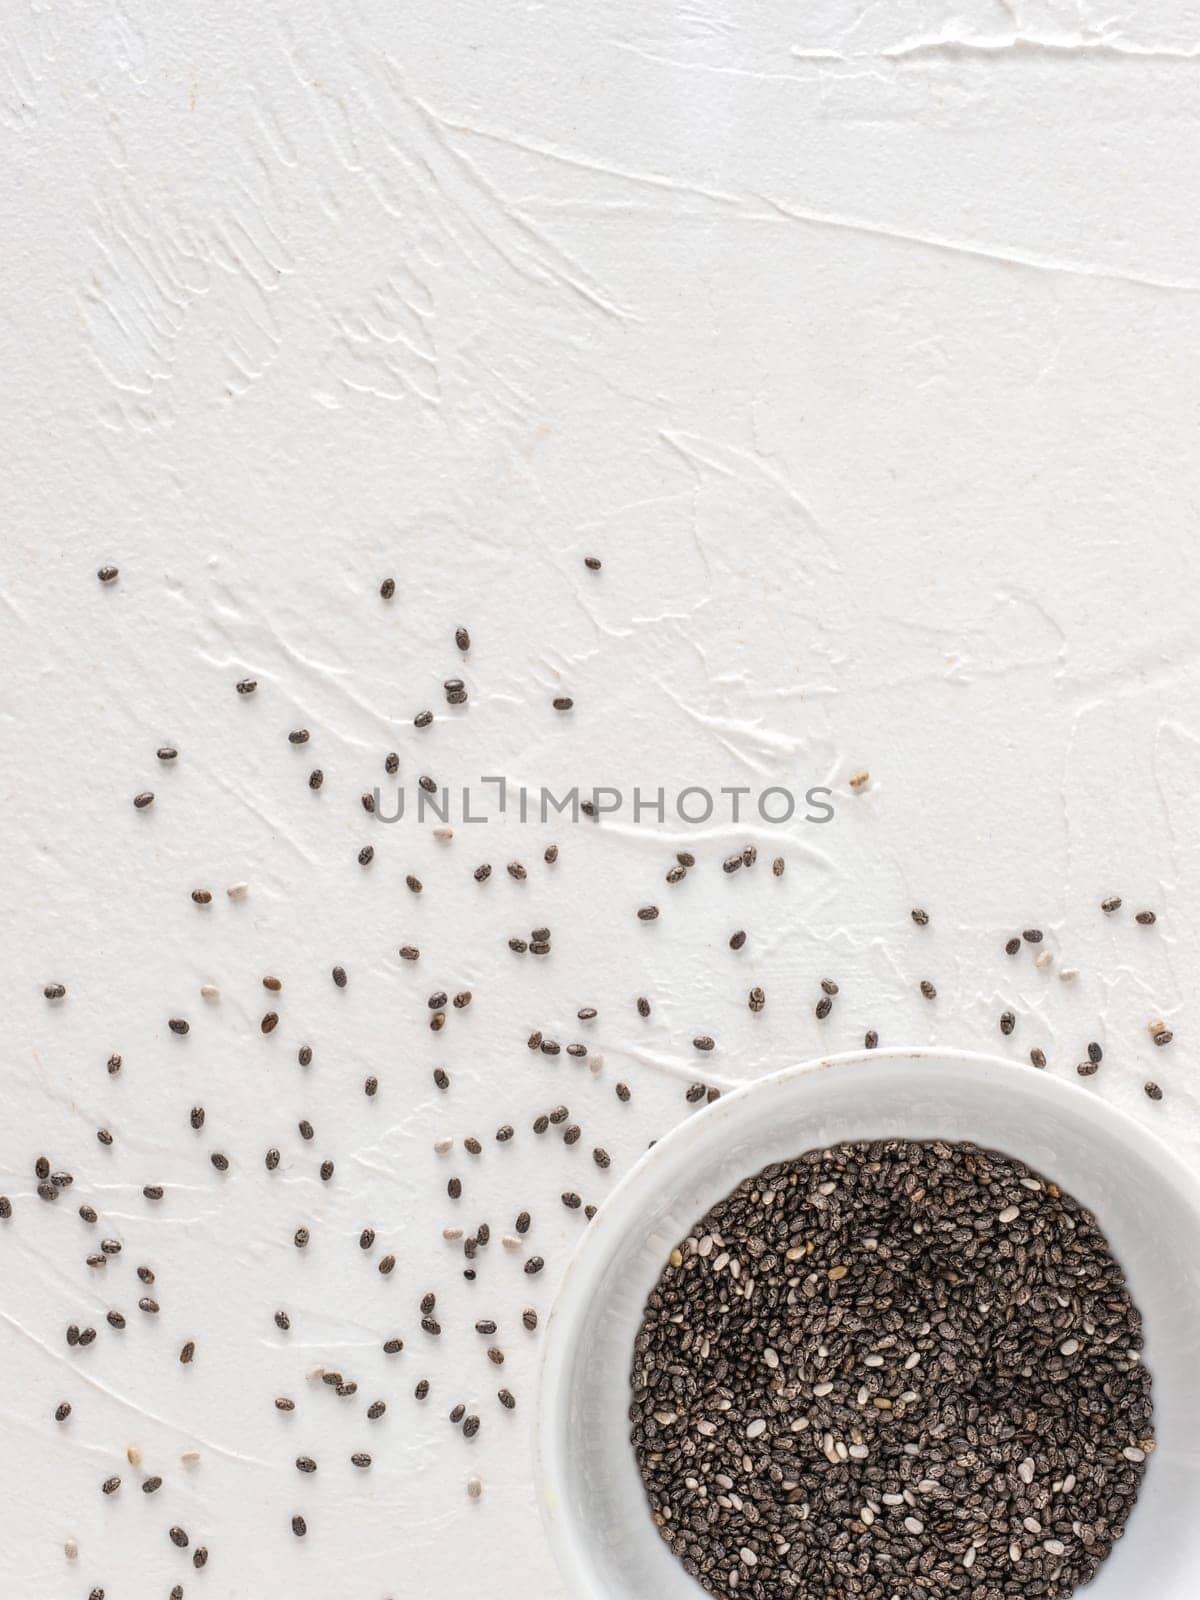 Chia seeds with copy space. Chia seed on white concrete textured background. Top view or flat lay. Copy space. Healthy food and diet concept